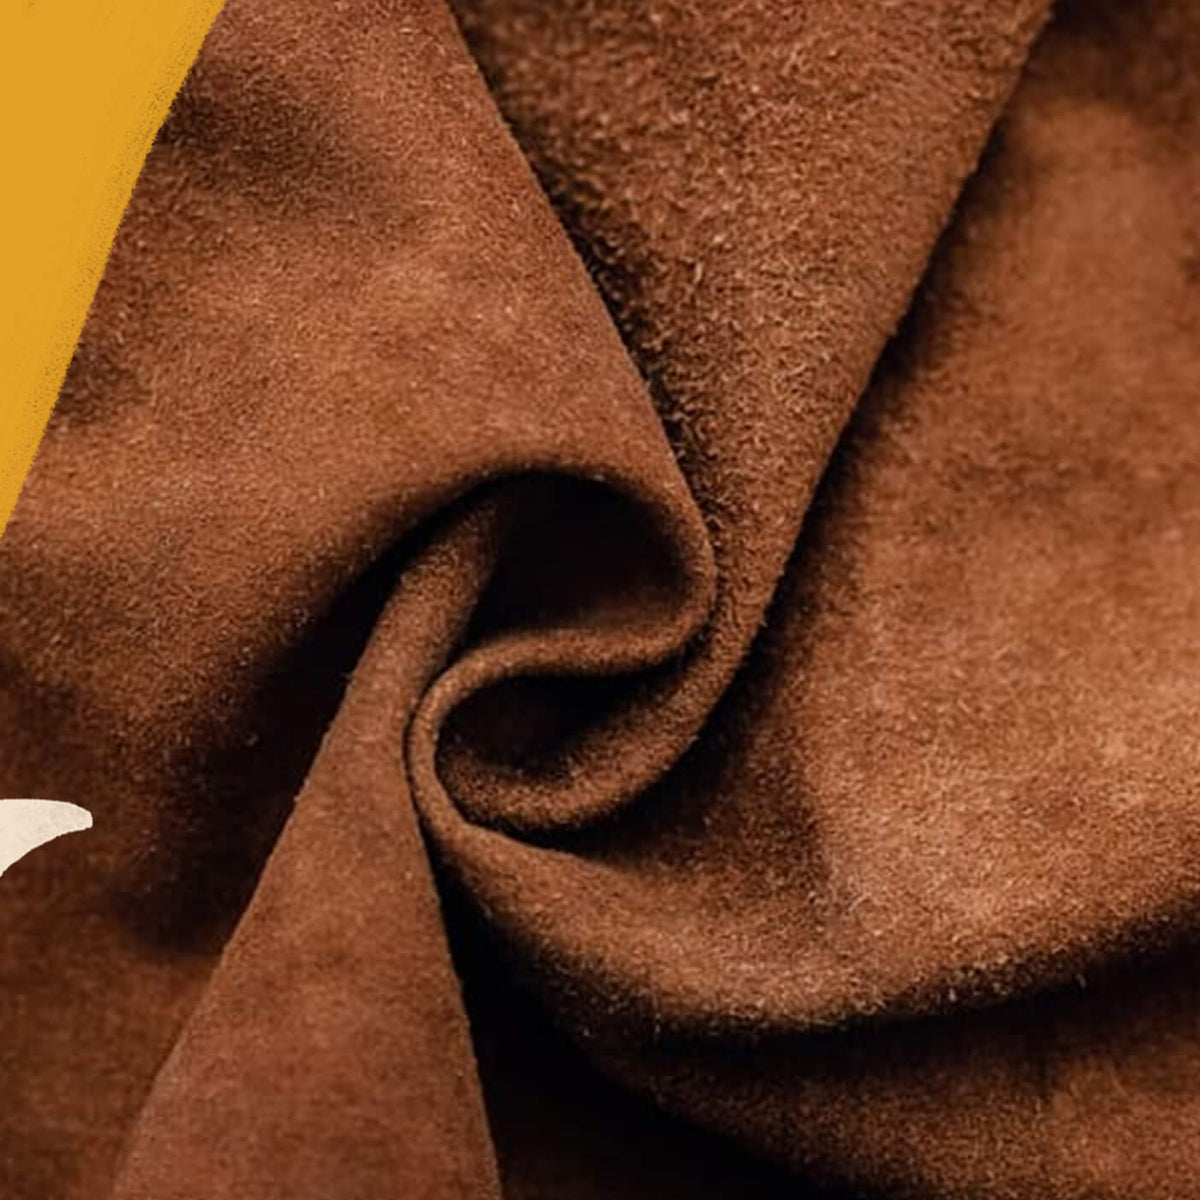 Suede leather - A complete guide!